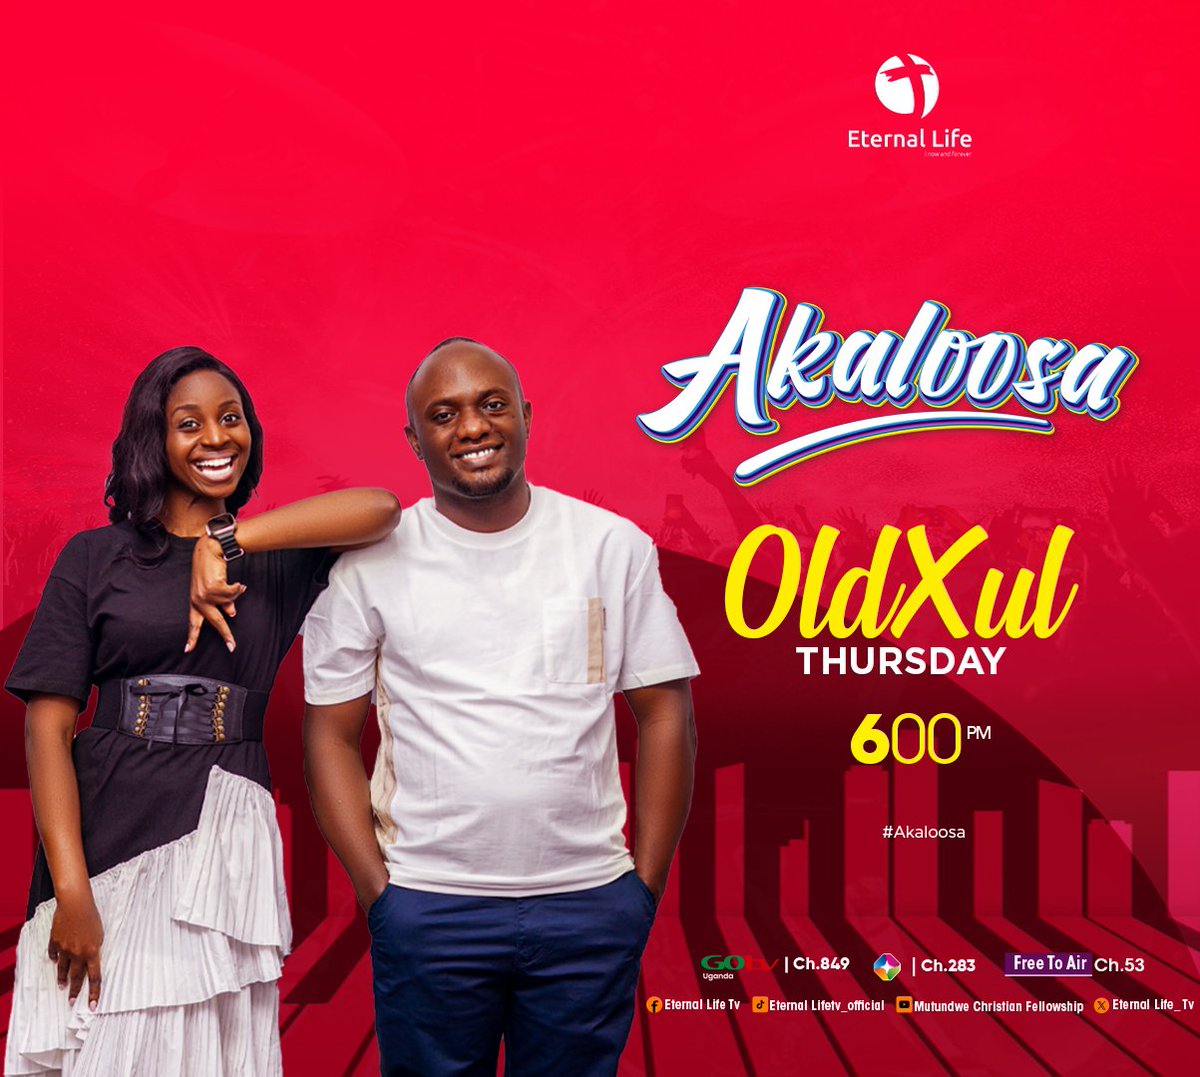 Later: Oldxul Thursday in #Akaloosa on Eternal life Tv. we are going back in the days with your favourite gospel oldies with @RenezMuzik @Ronniegospledj TOPIC OF THE DAY: REQUEST FOR YOUR FAVORITE OLDXUL GOSPEL JAM ?